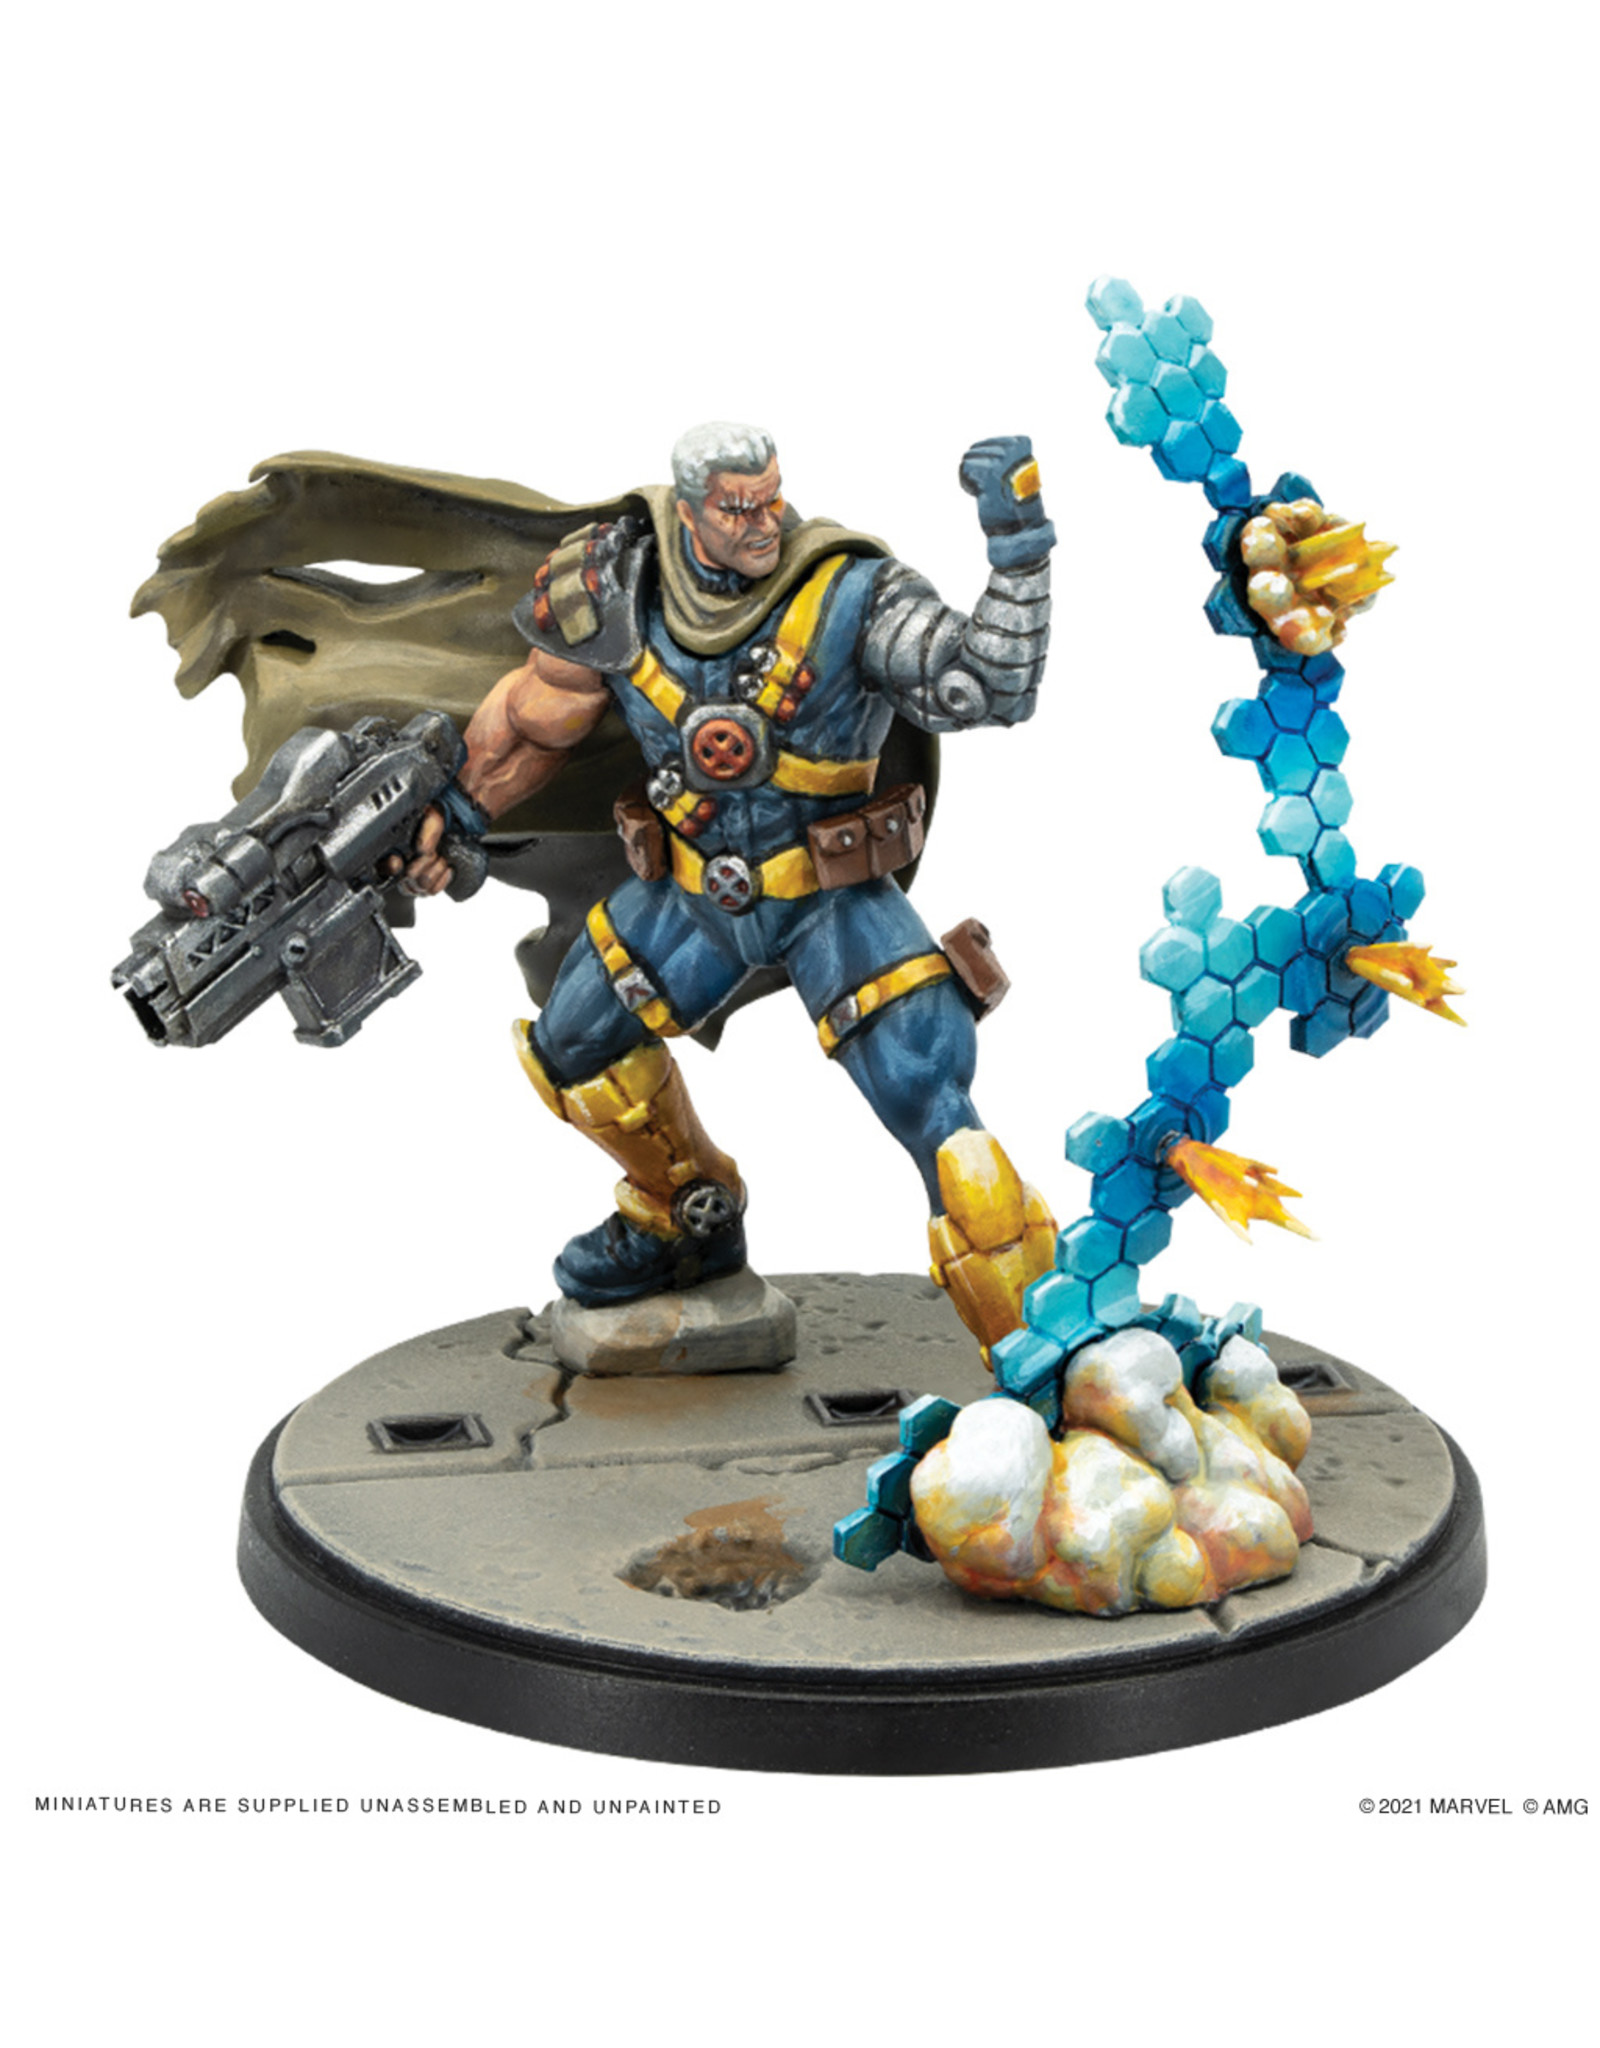 Atomic Mass Games Marvel Crisis Protocol: Cable & Domino